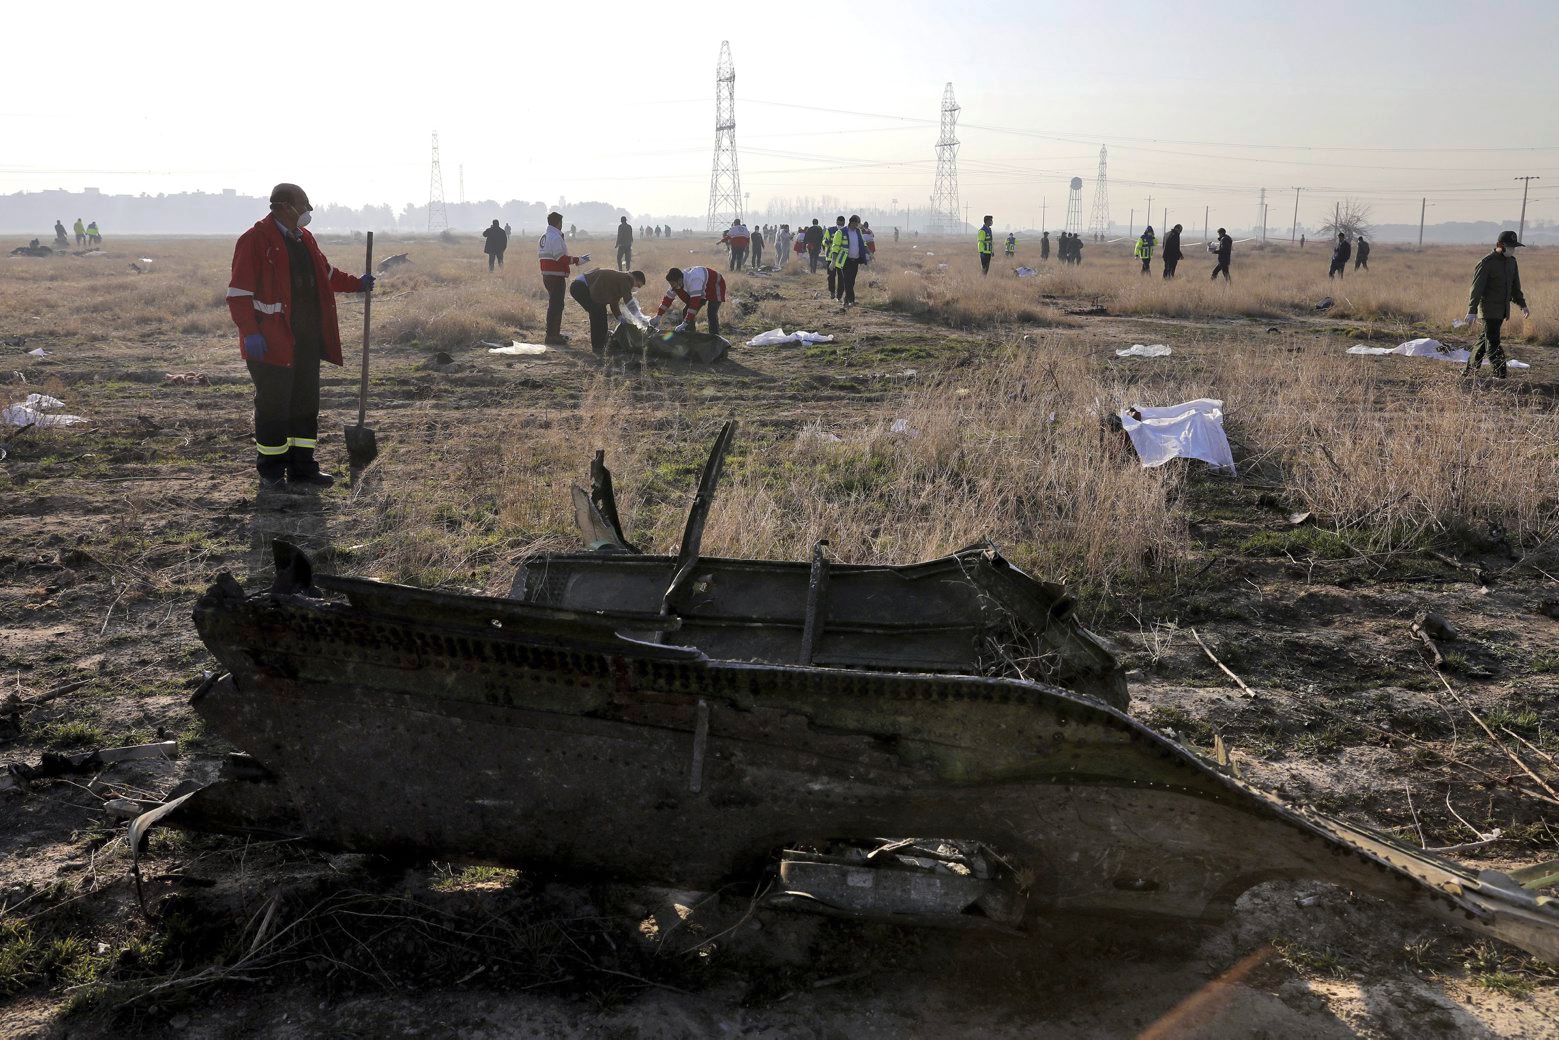 In this Wednesday, Jan. 8, 2020 photo, rescue workers search the scene where a Ukrainian plane crashed in Shahedshahr, southwest of the capital Tehran, Iran. Iran on Friday denied Western allegations that one of its own missiles downed a Ukrainian jetliner that crashed outside Tehran, and called on the U.S. and Canada to share any information they have on the crash, which killed all 176 people on board. (AP Photo/Ebrahim Noroozi) Iran Plane Crash